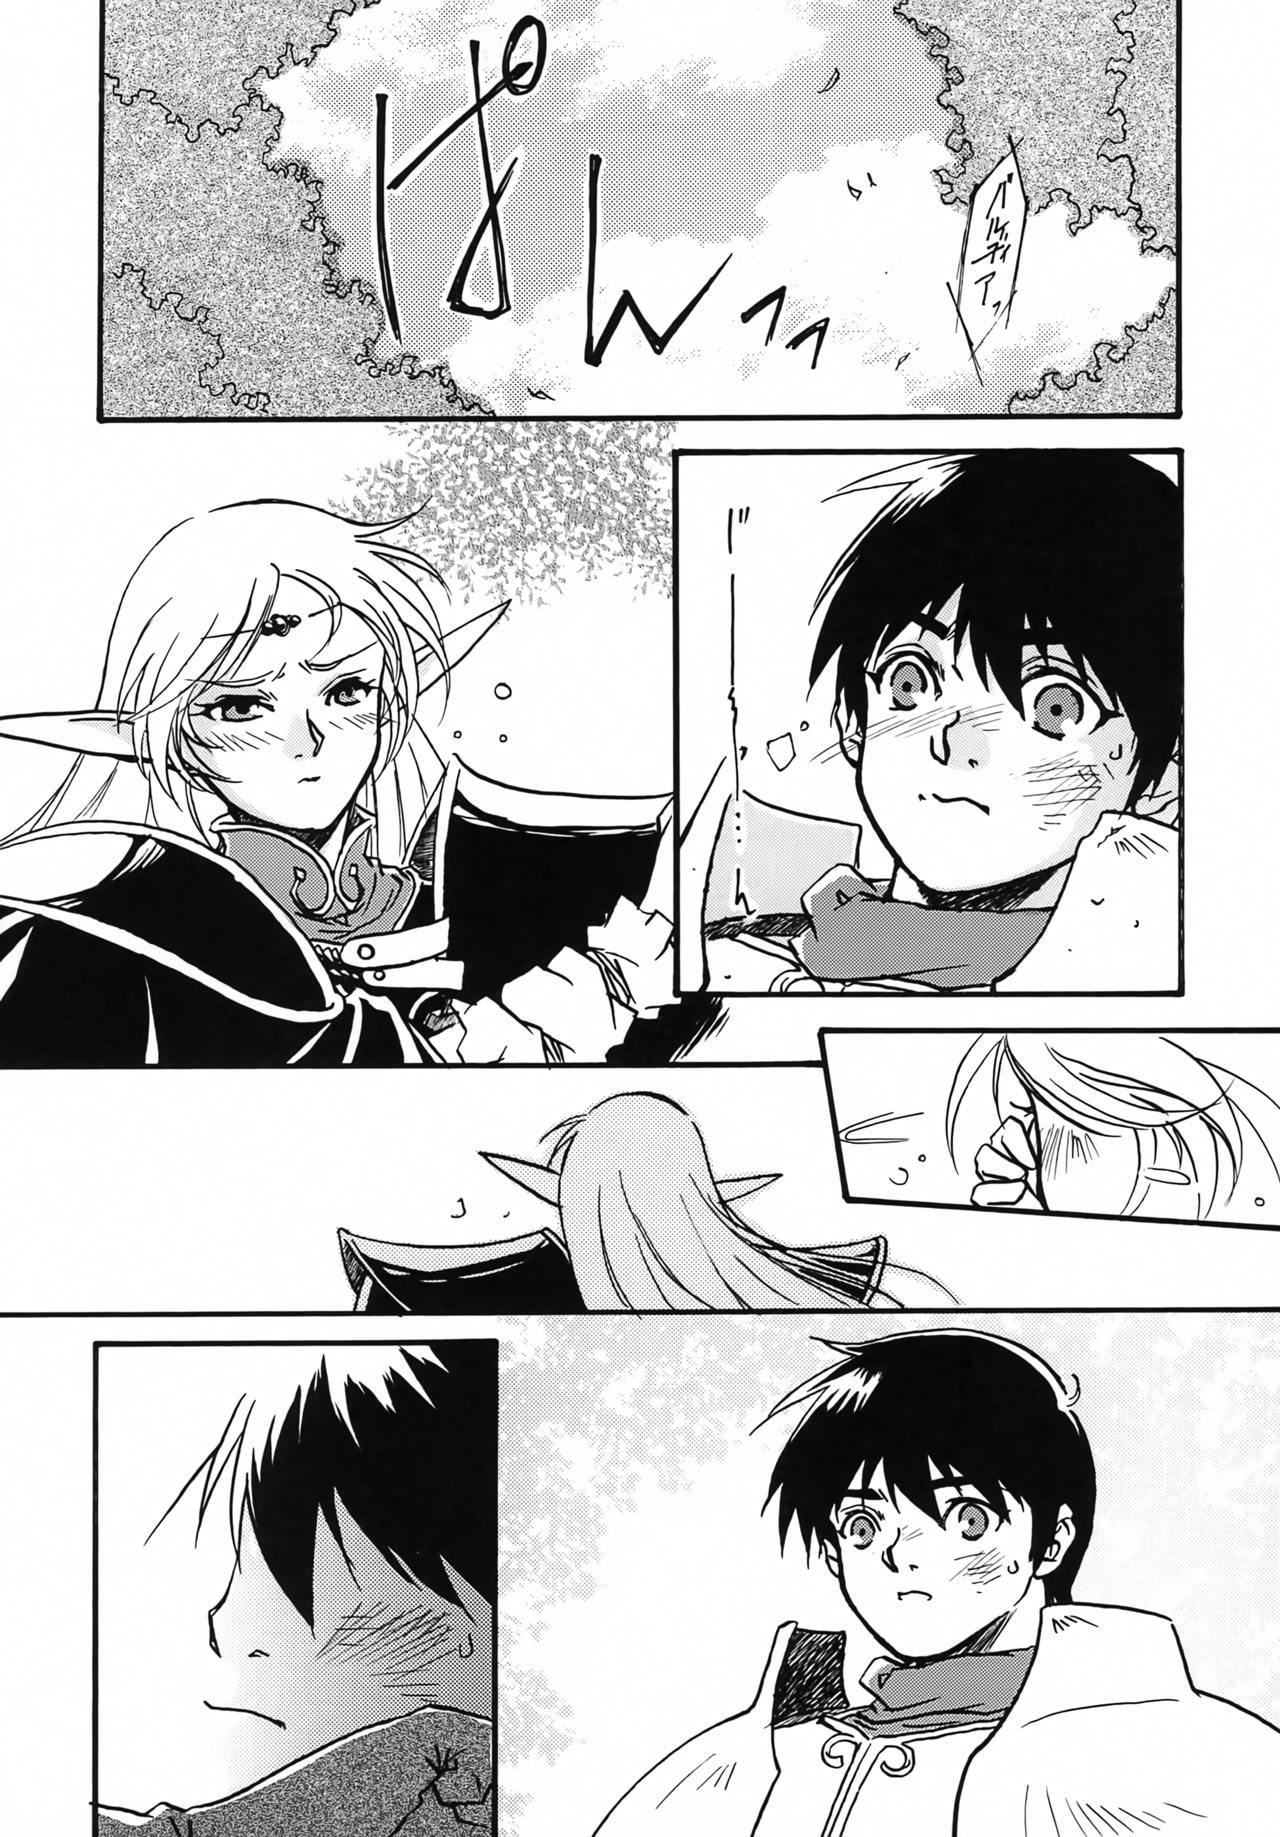 The another grey day in the big blue world - Record of lodoss war Camera - Page 11